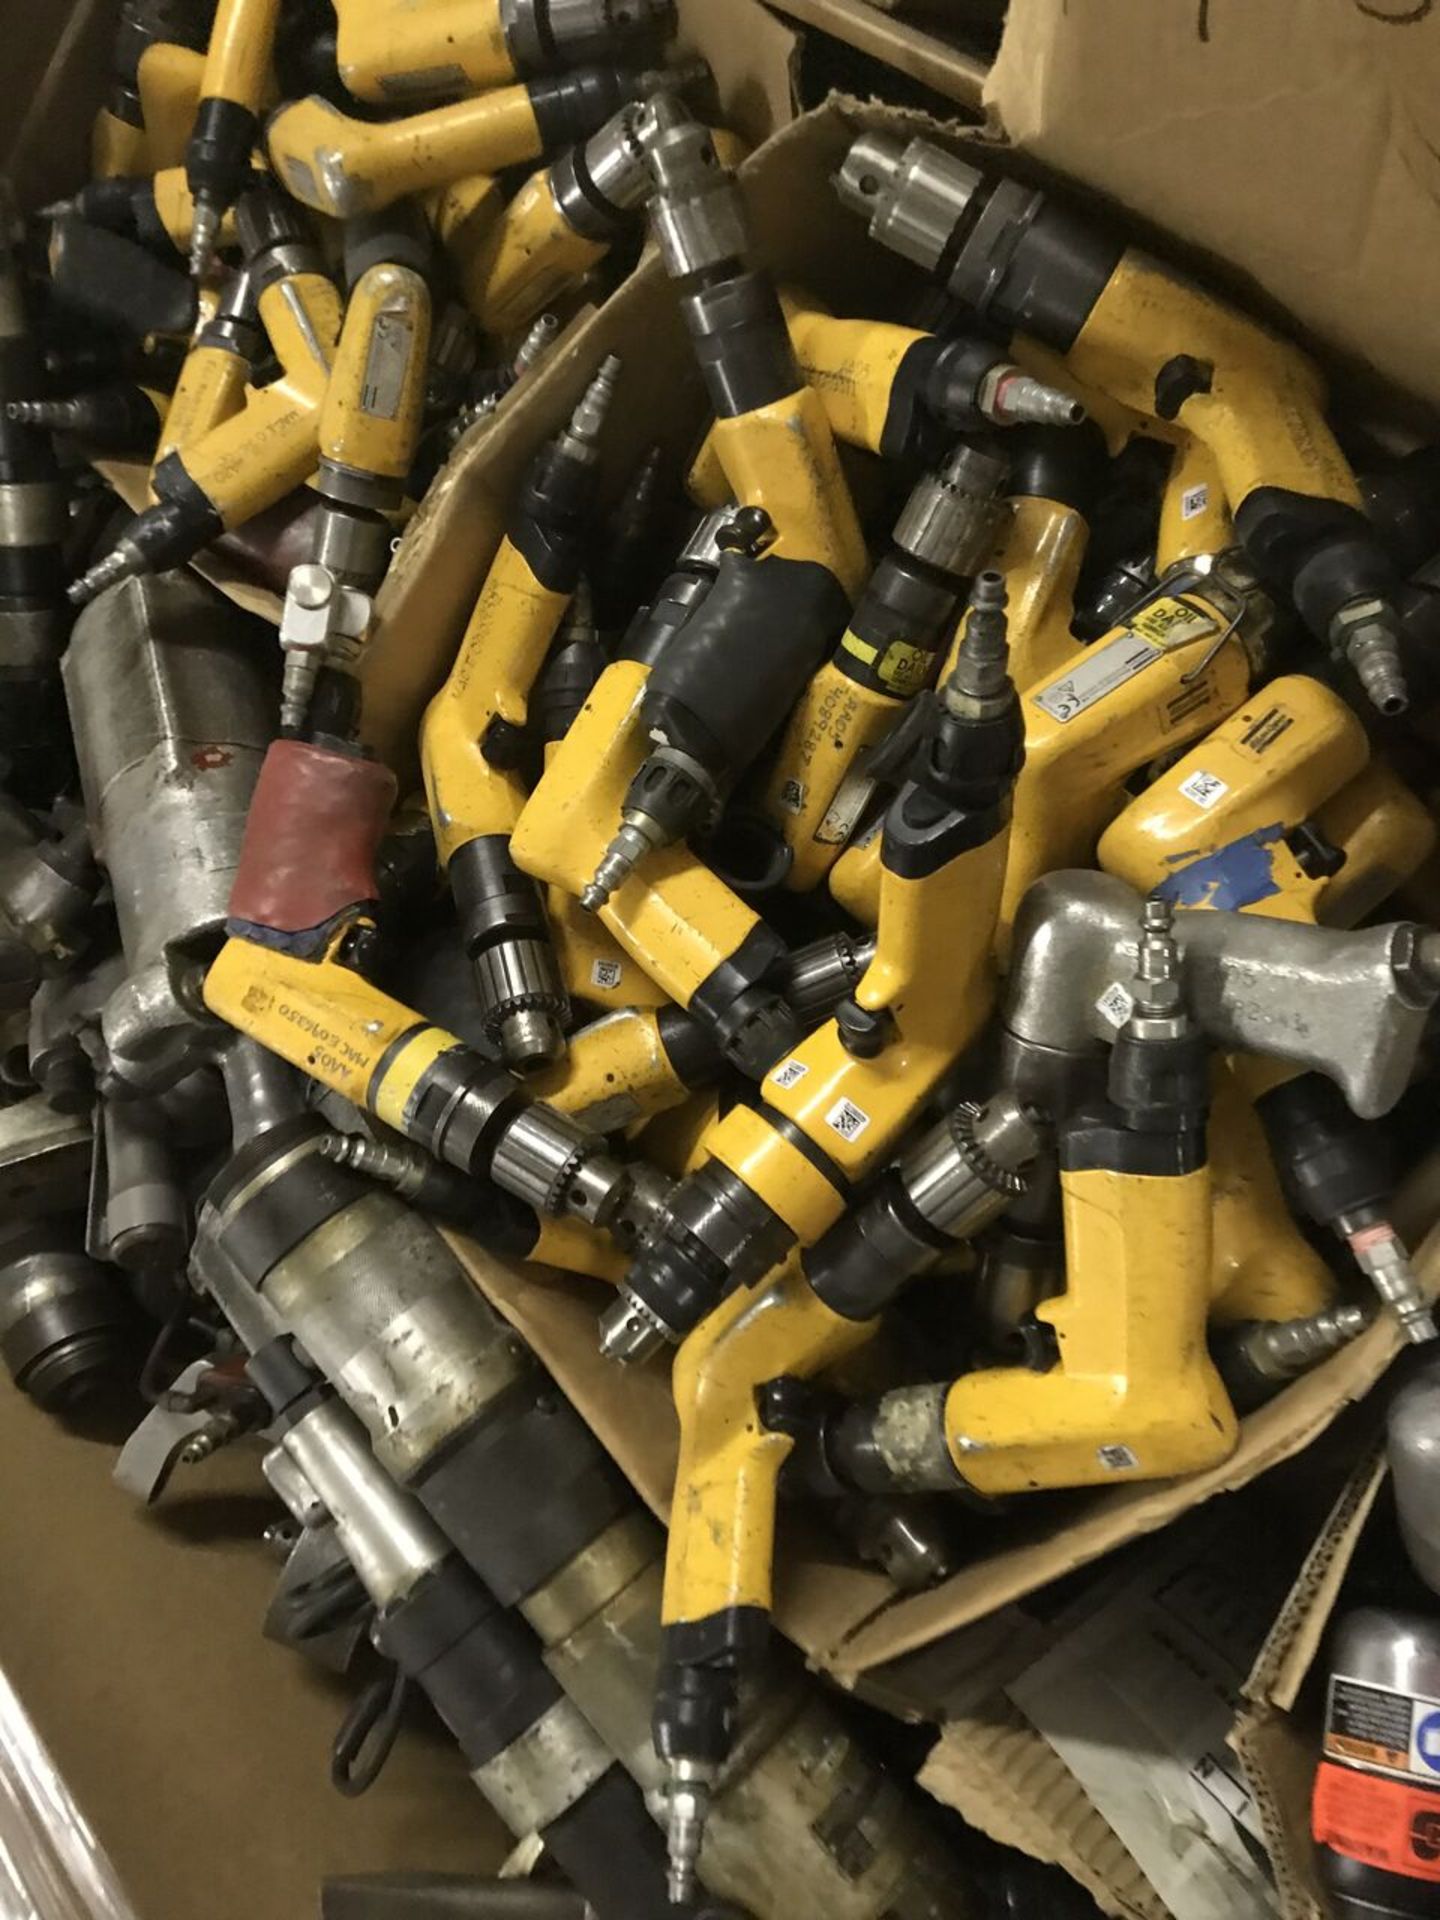 Box of Pneumatic Hand Tools, Compression Riveters, ARO Hand Drills; Rigging Fee: $50 - Image 3 of 5